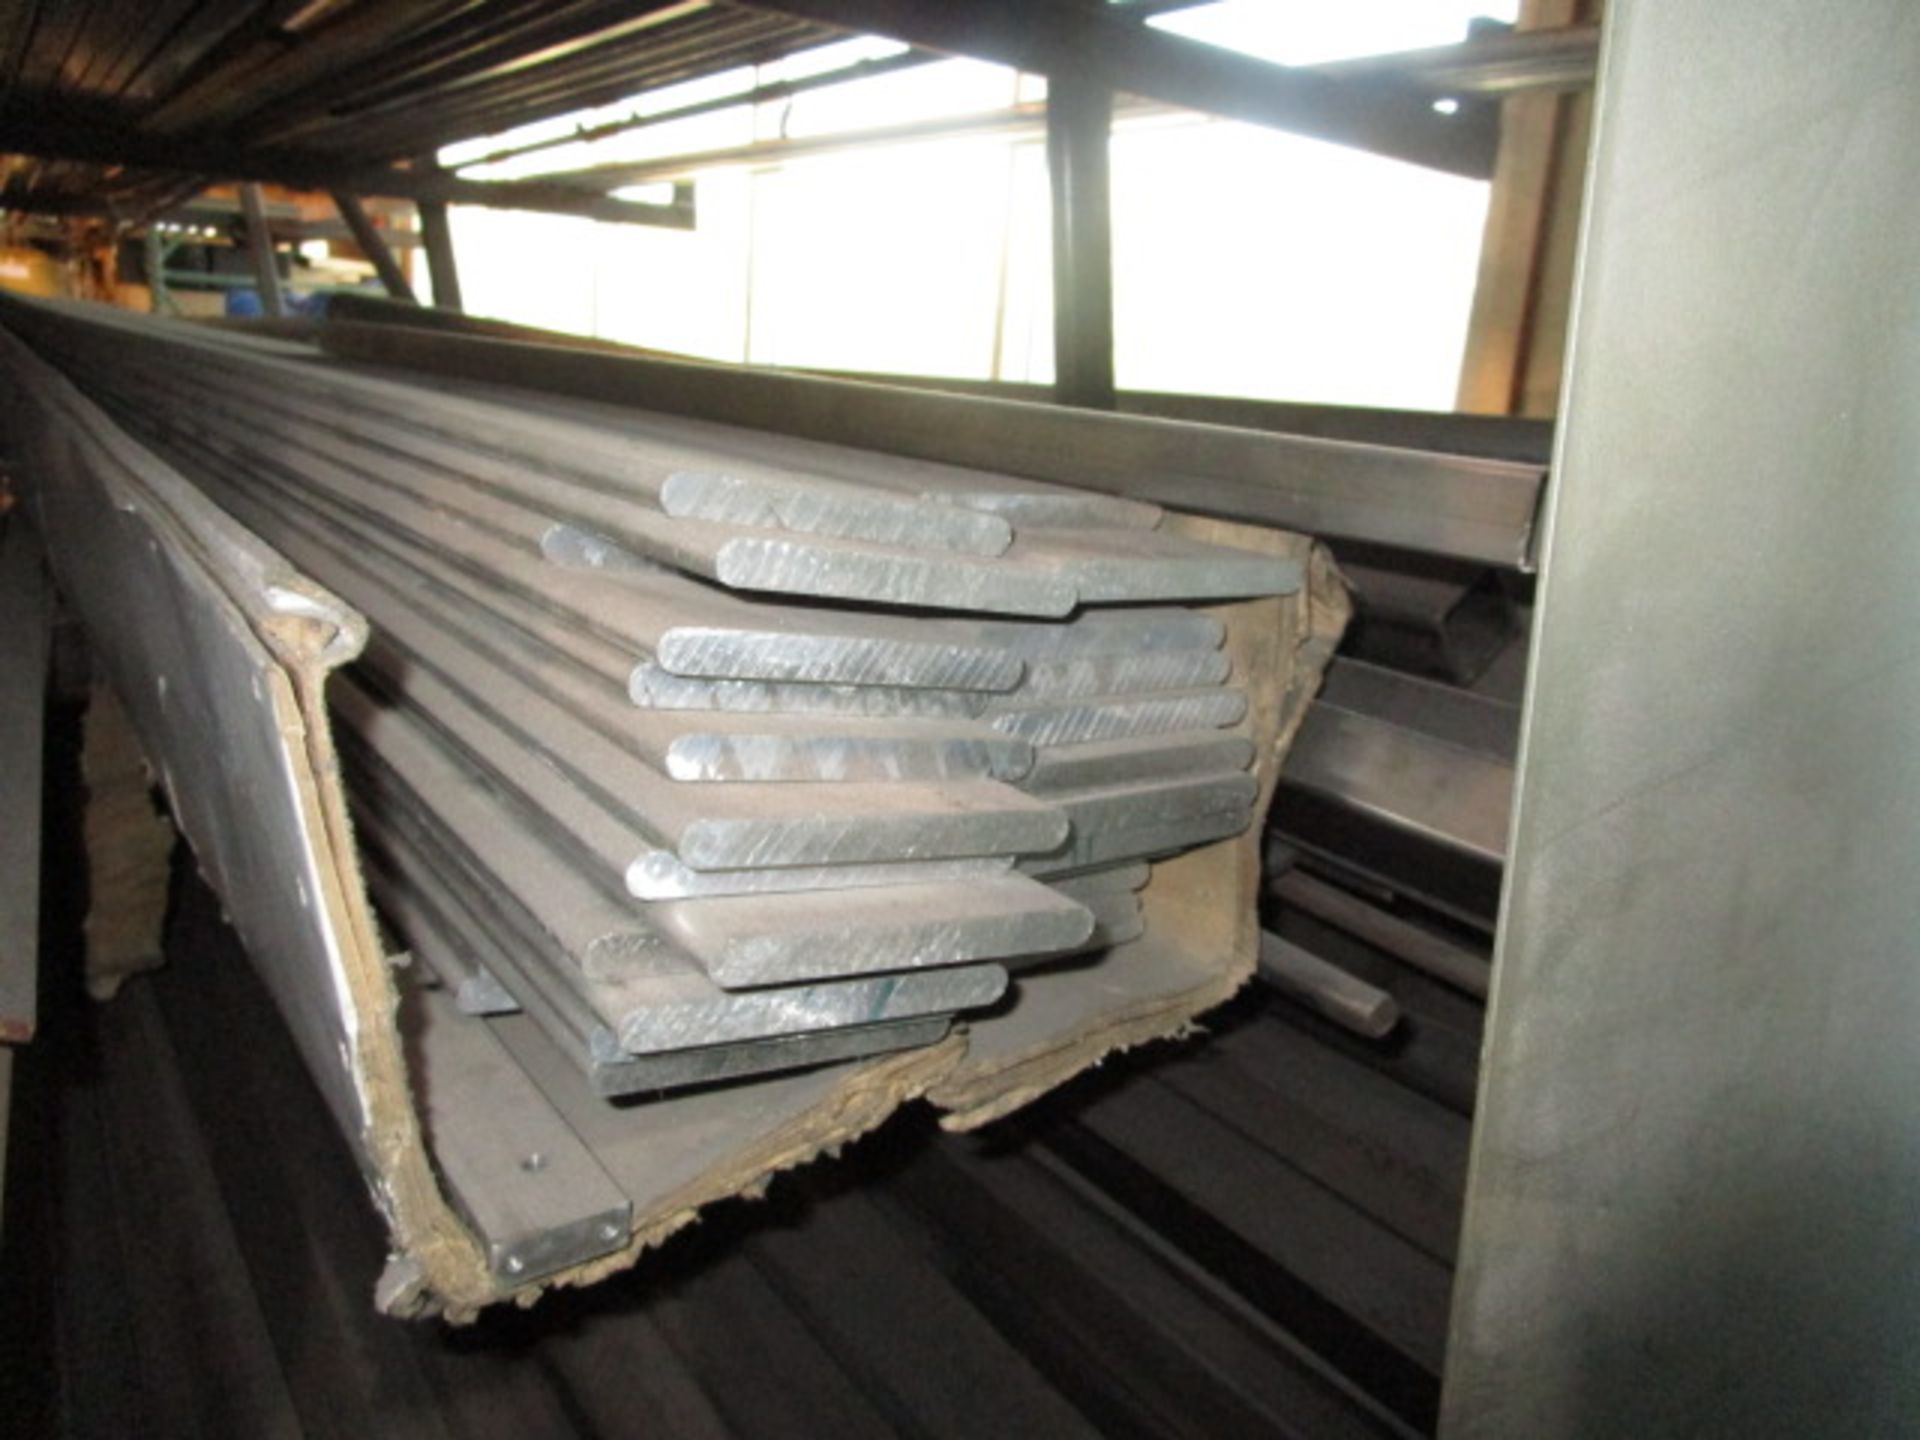 Assorted Metal Tubing, Flat Stock, And Other Assorted Raw Metal Materials On Rack (250" x 112" w) - Image 7 of 9